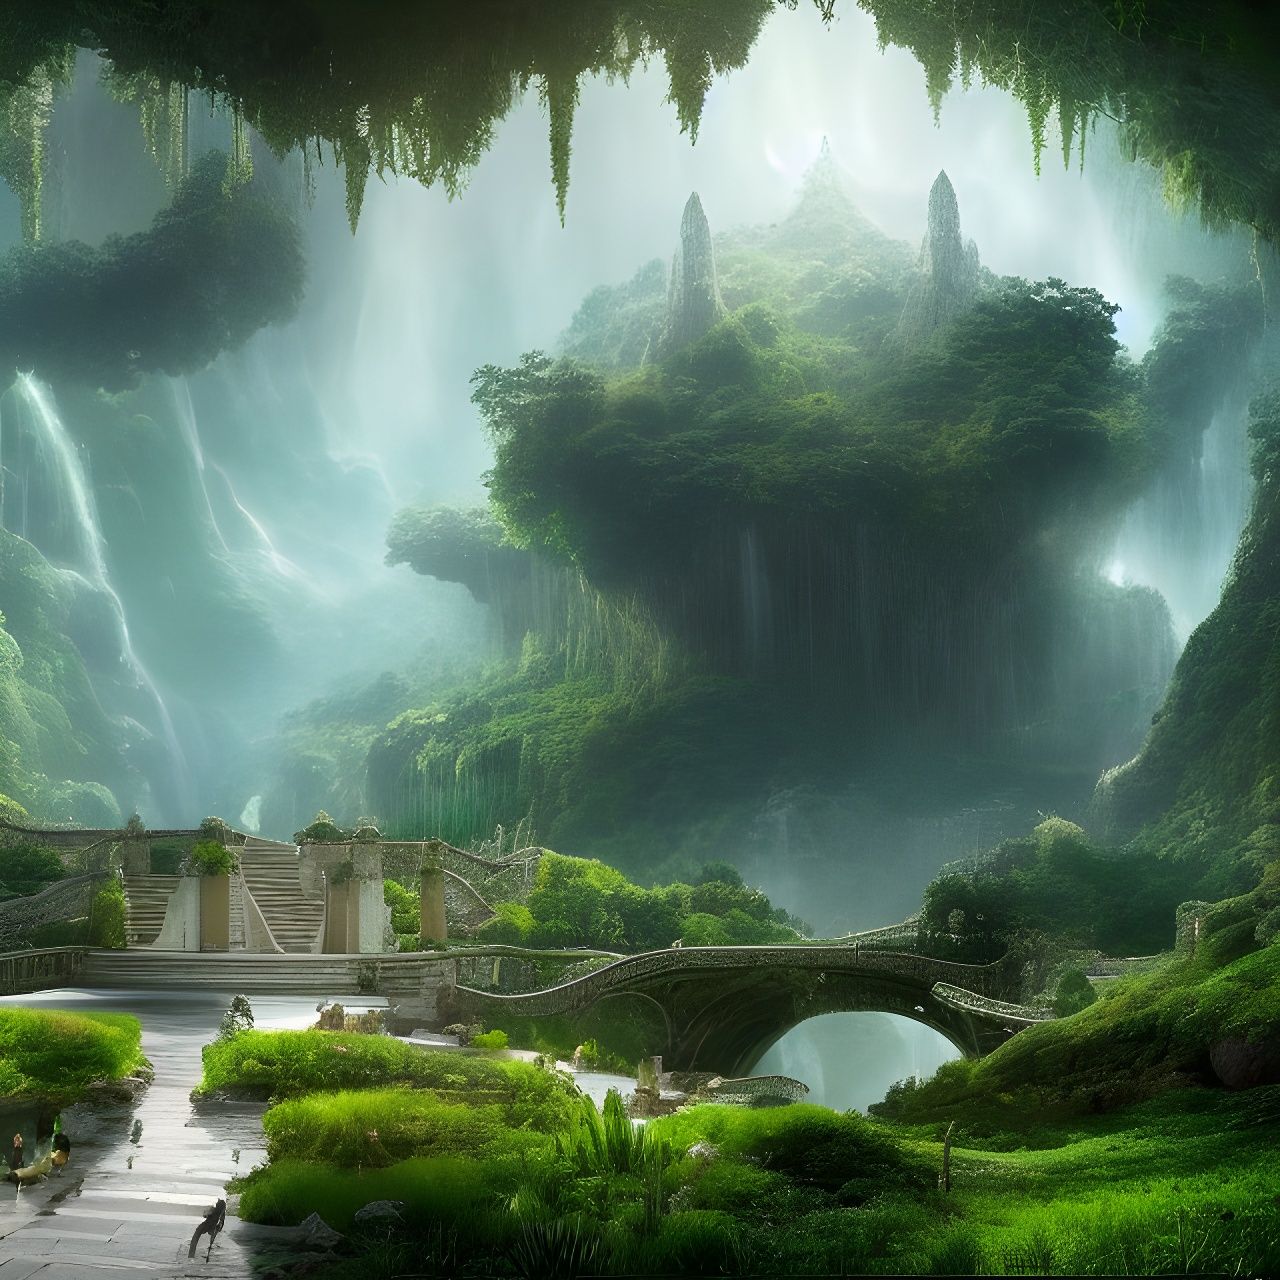 Middle Earth: Rivendell III